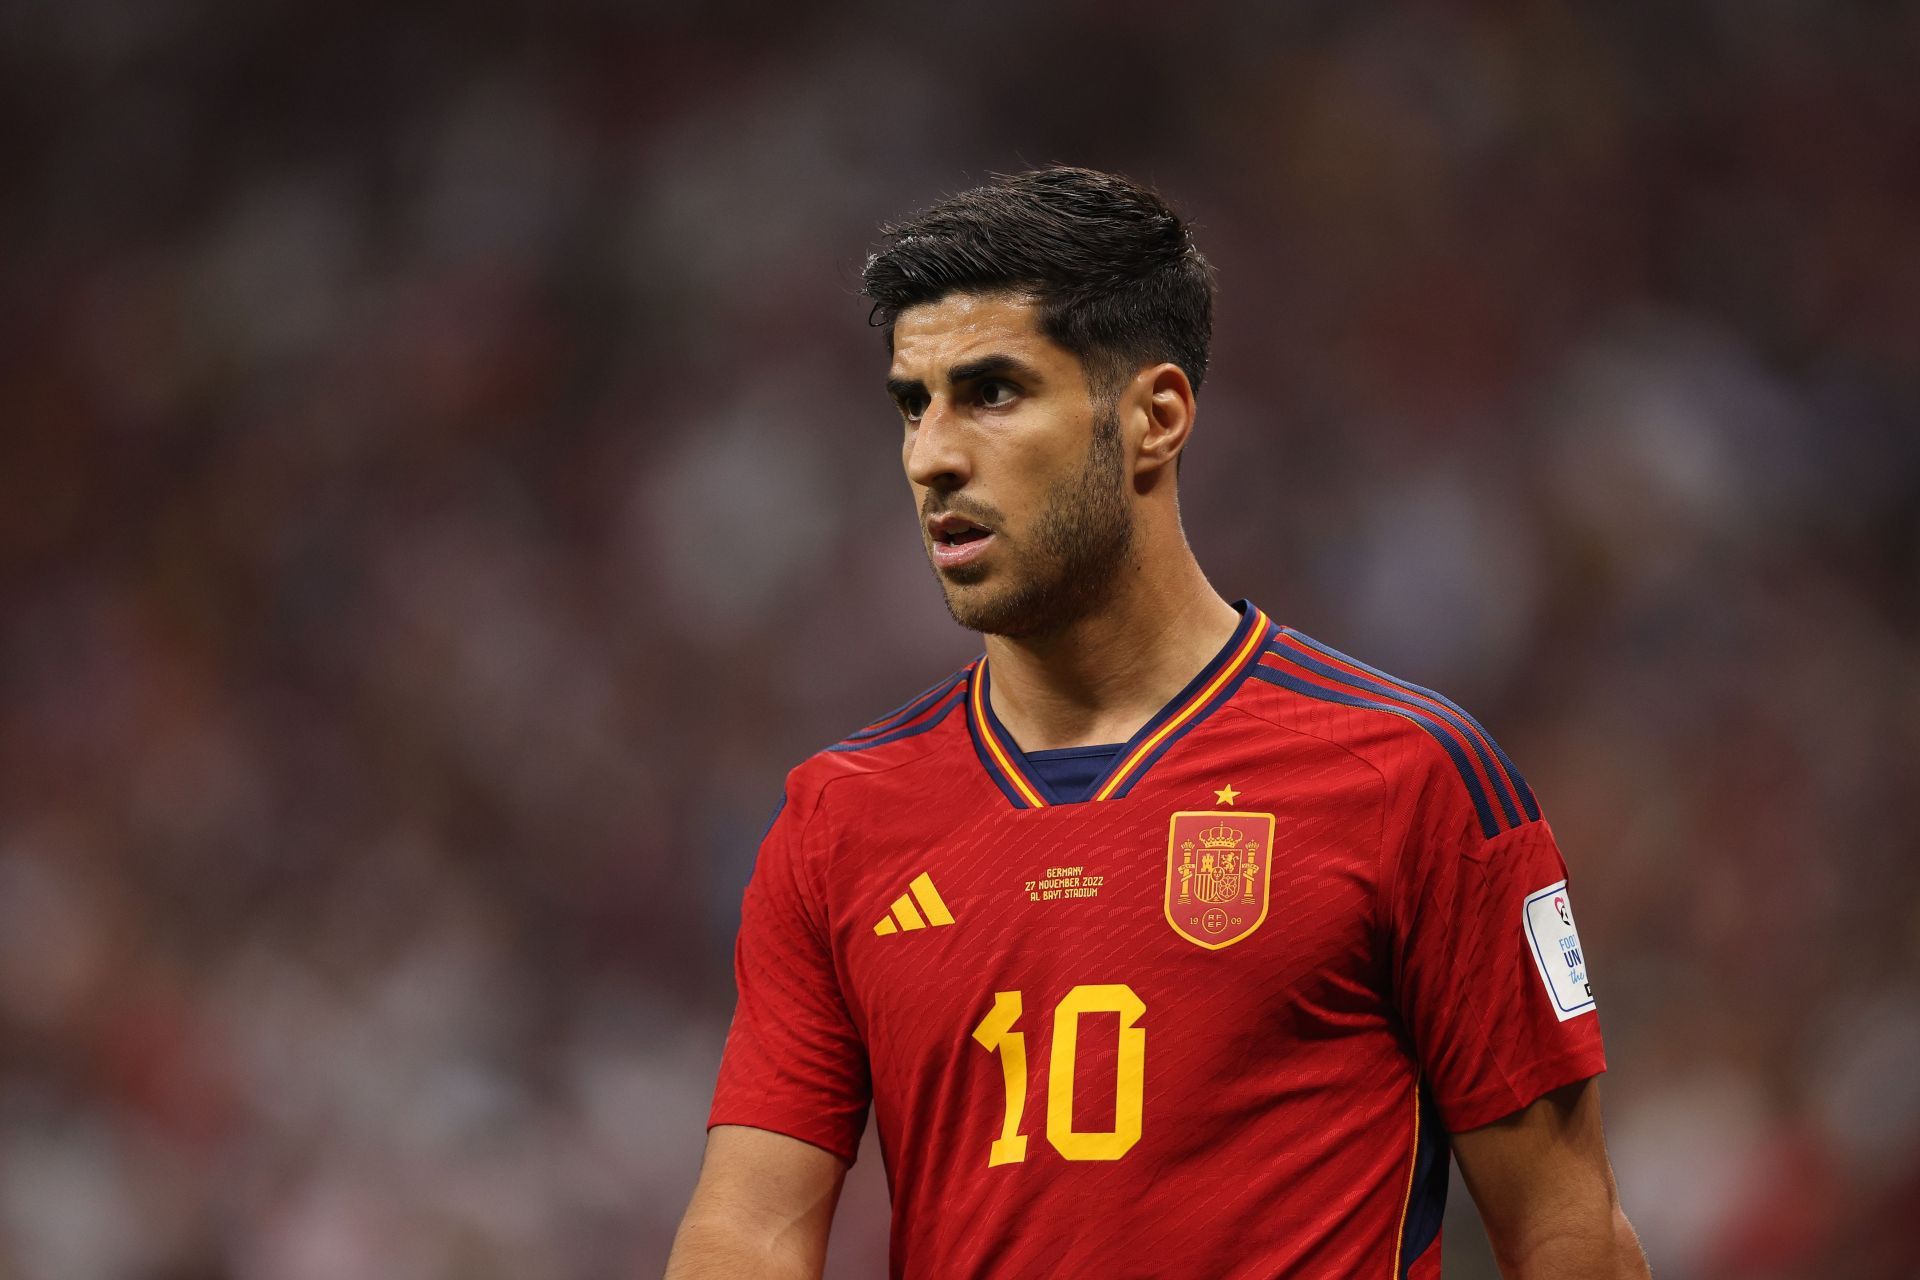 Marco Asensio has admirers at Old Trafford.